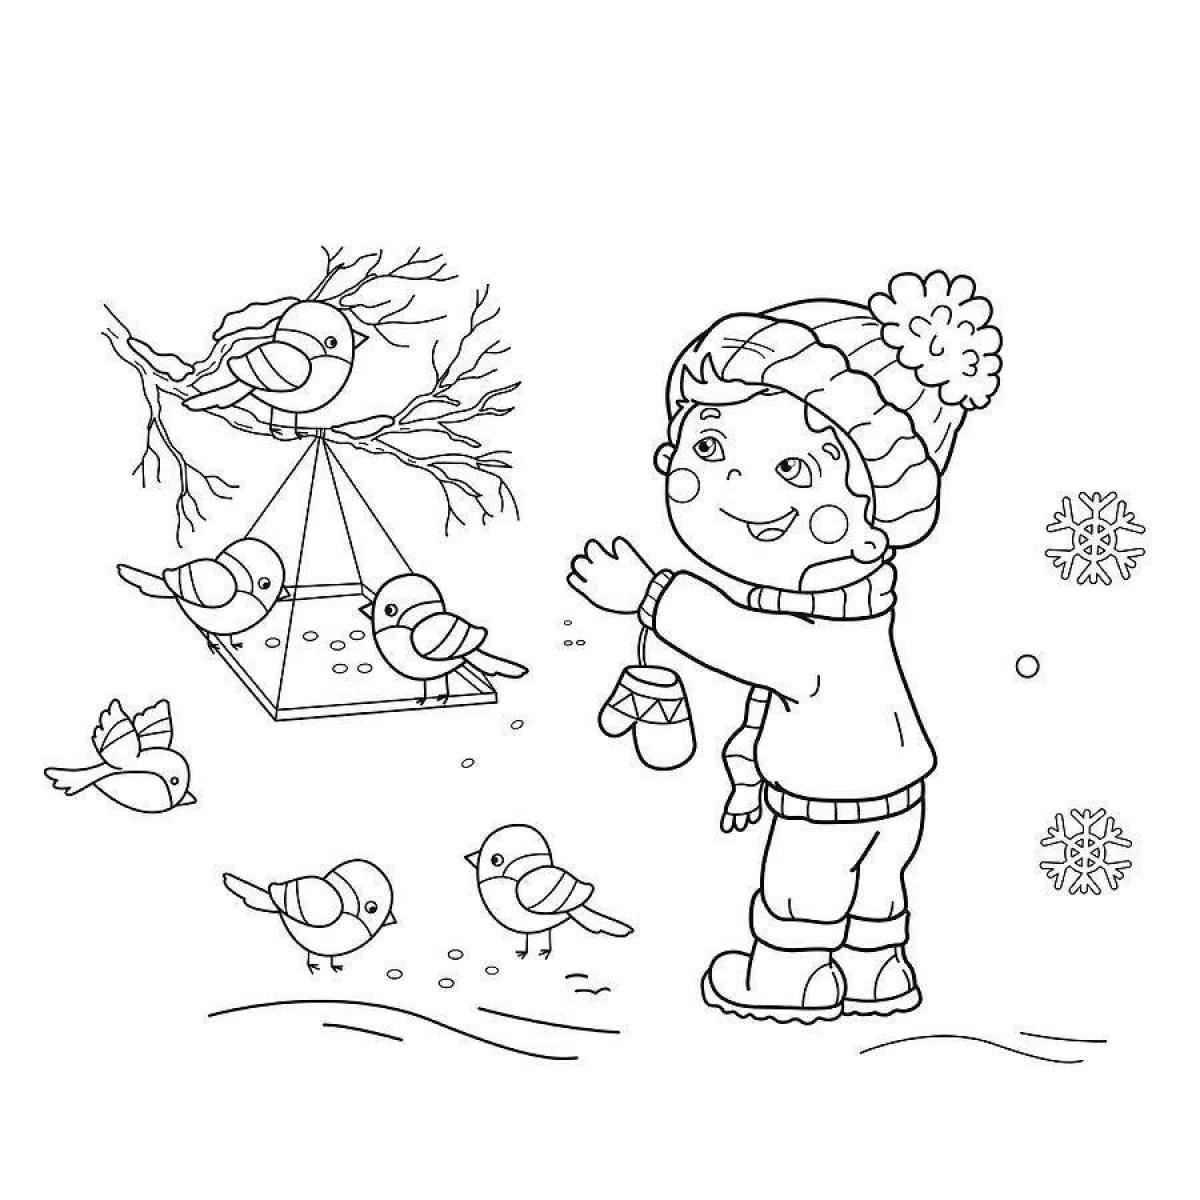 Live winter animal coloring book